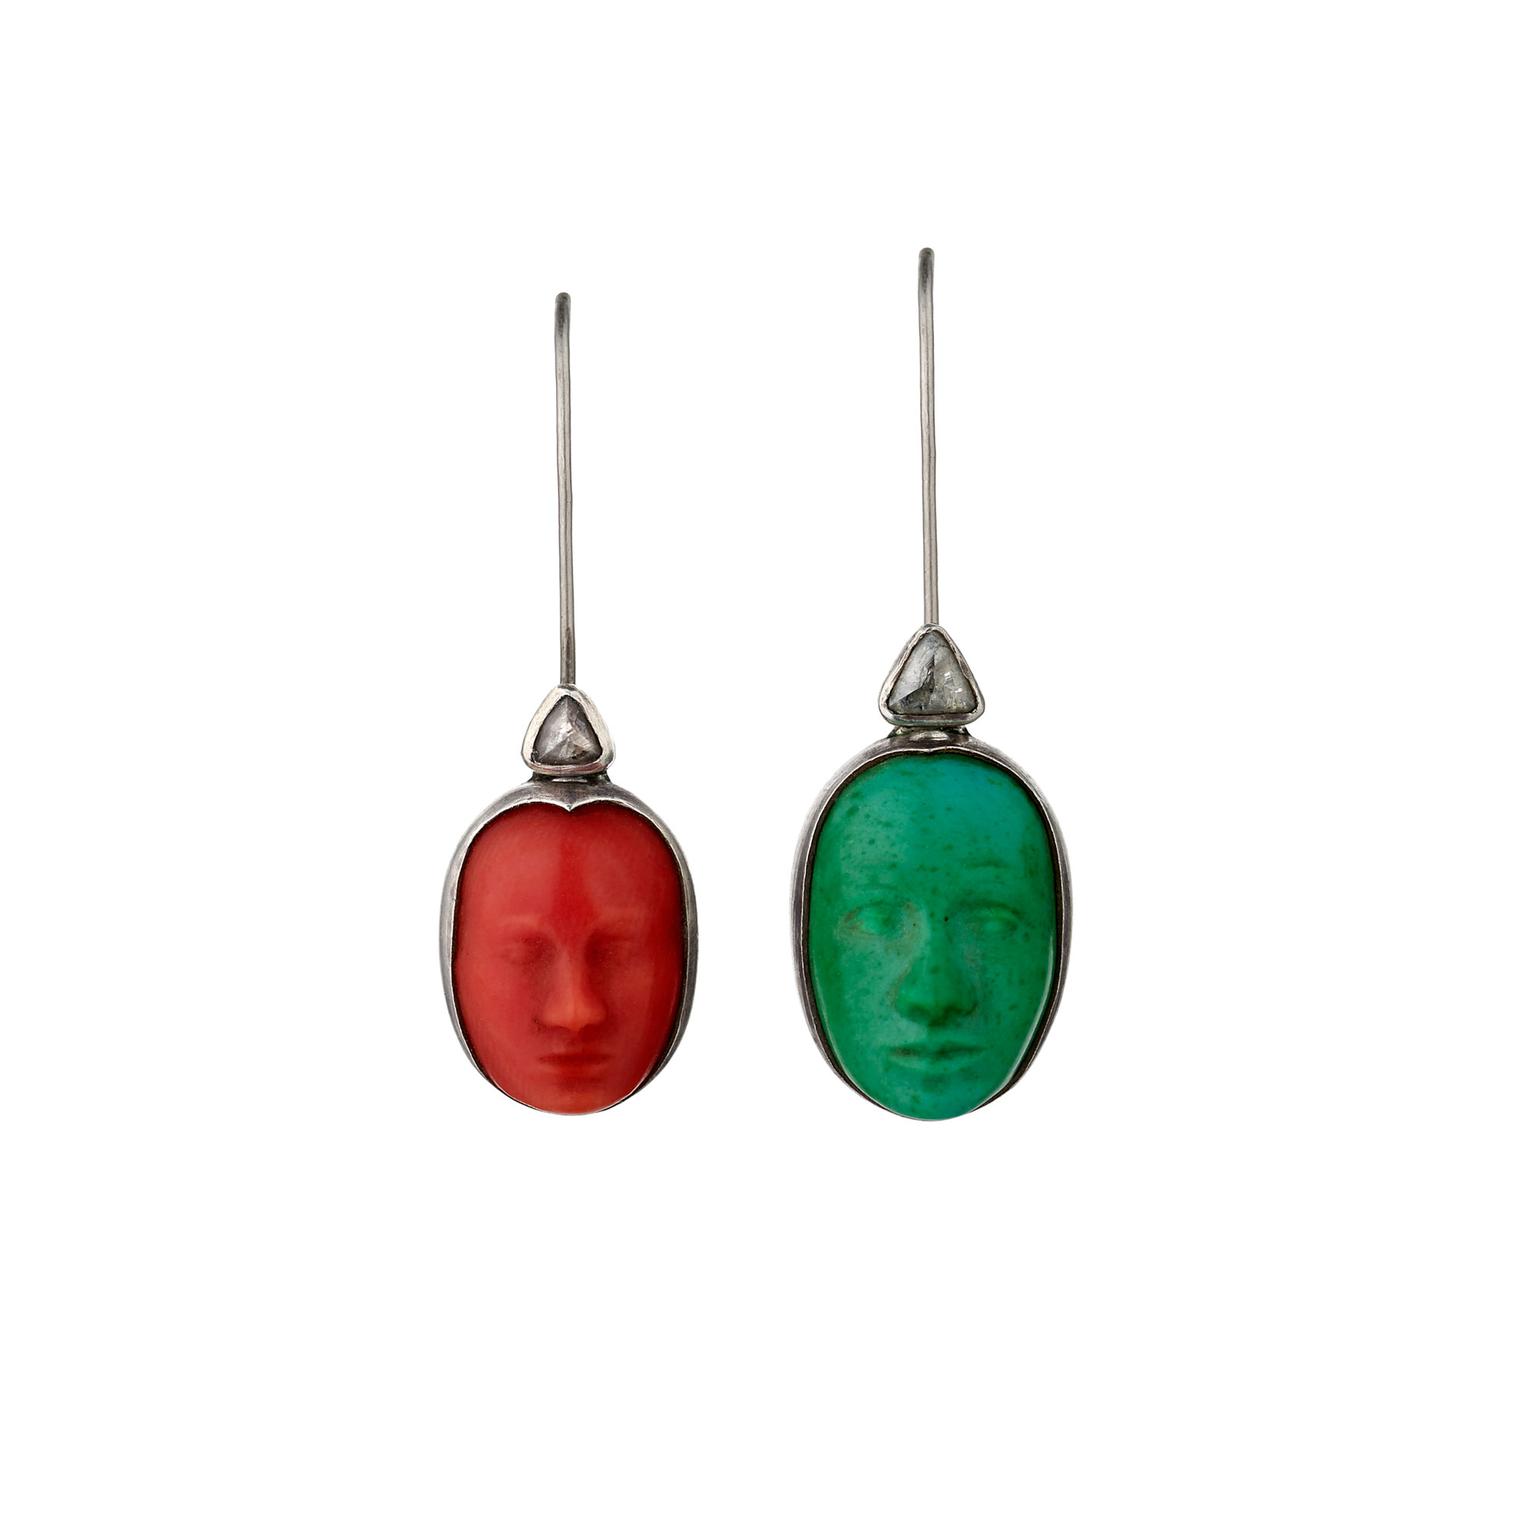 Charlotte De Syllas coral, turquoise and rough diamond earrings